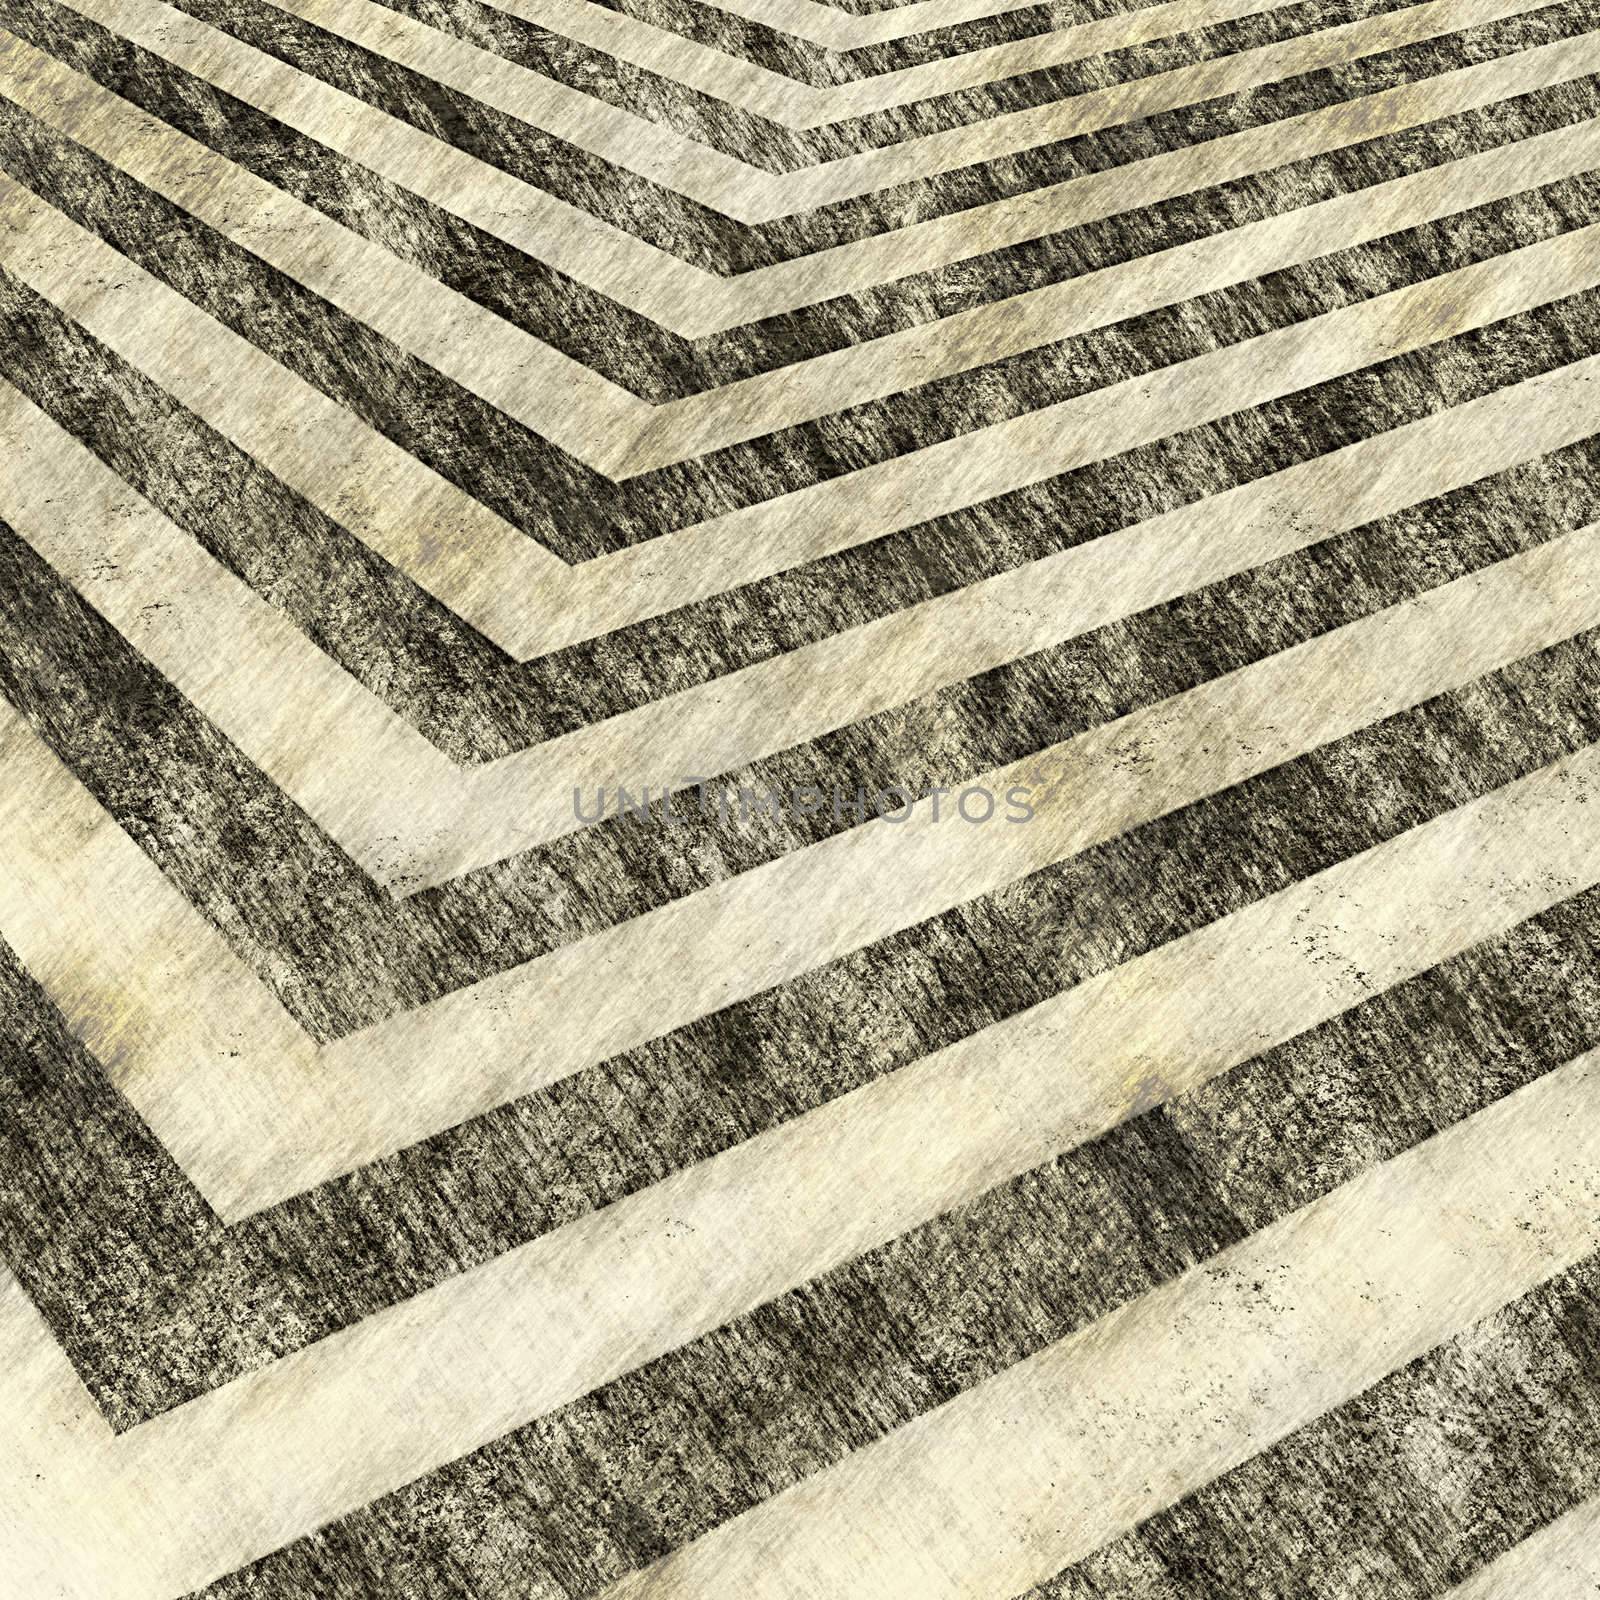 A sepia toned hazard stripes background with an aged vintage texture.